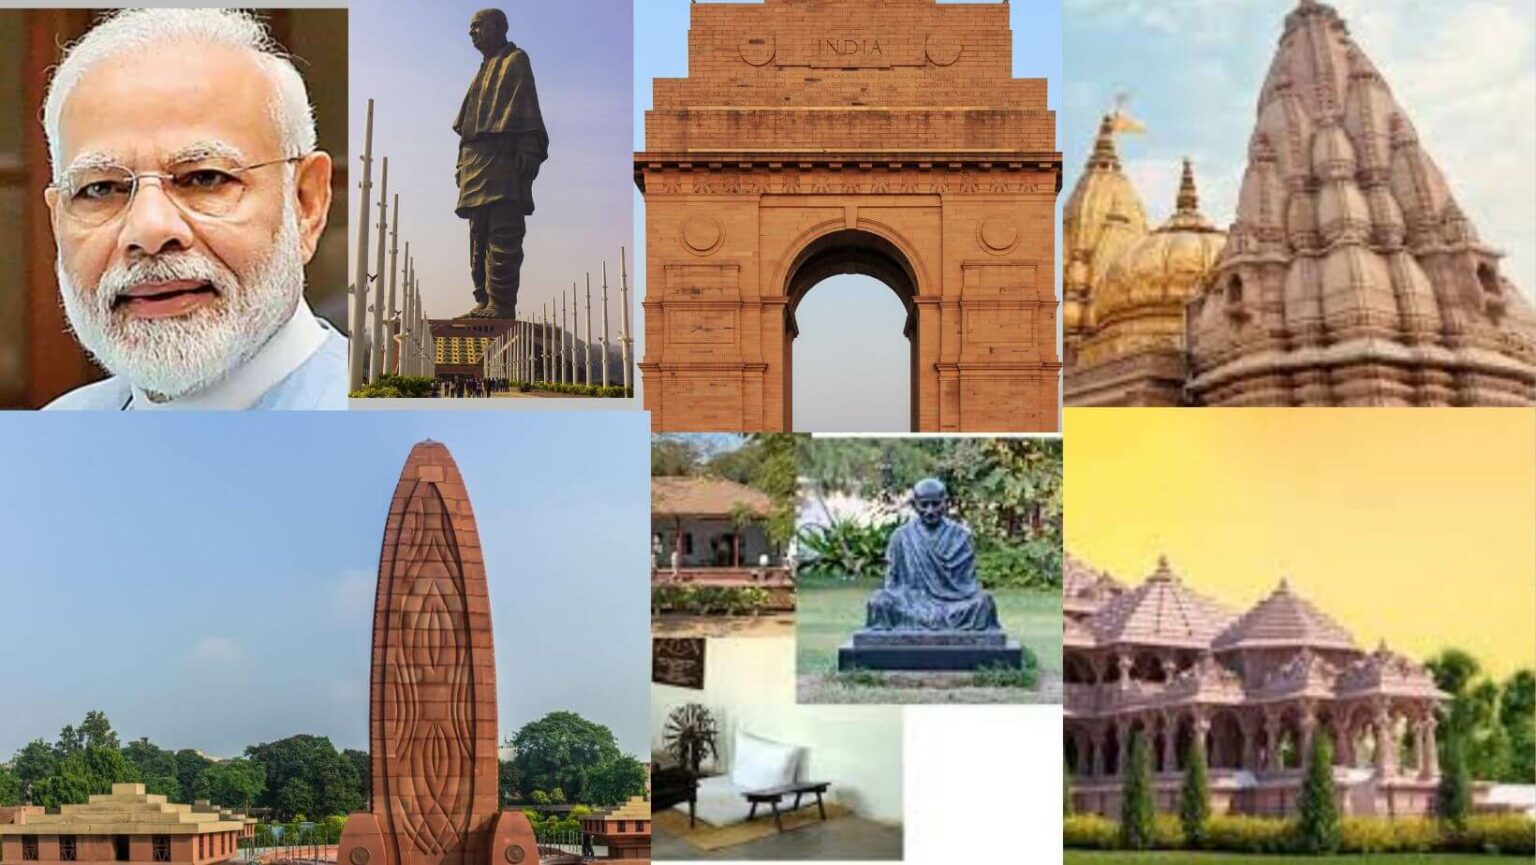 Dharohar Bharat Ki: A Journey Through India's Rich Heritage and the Vision of PM Modi"